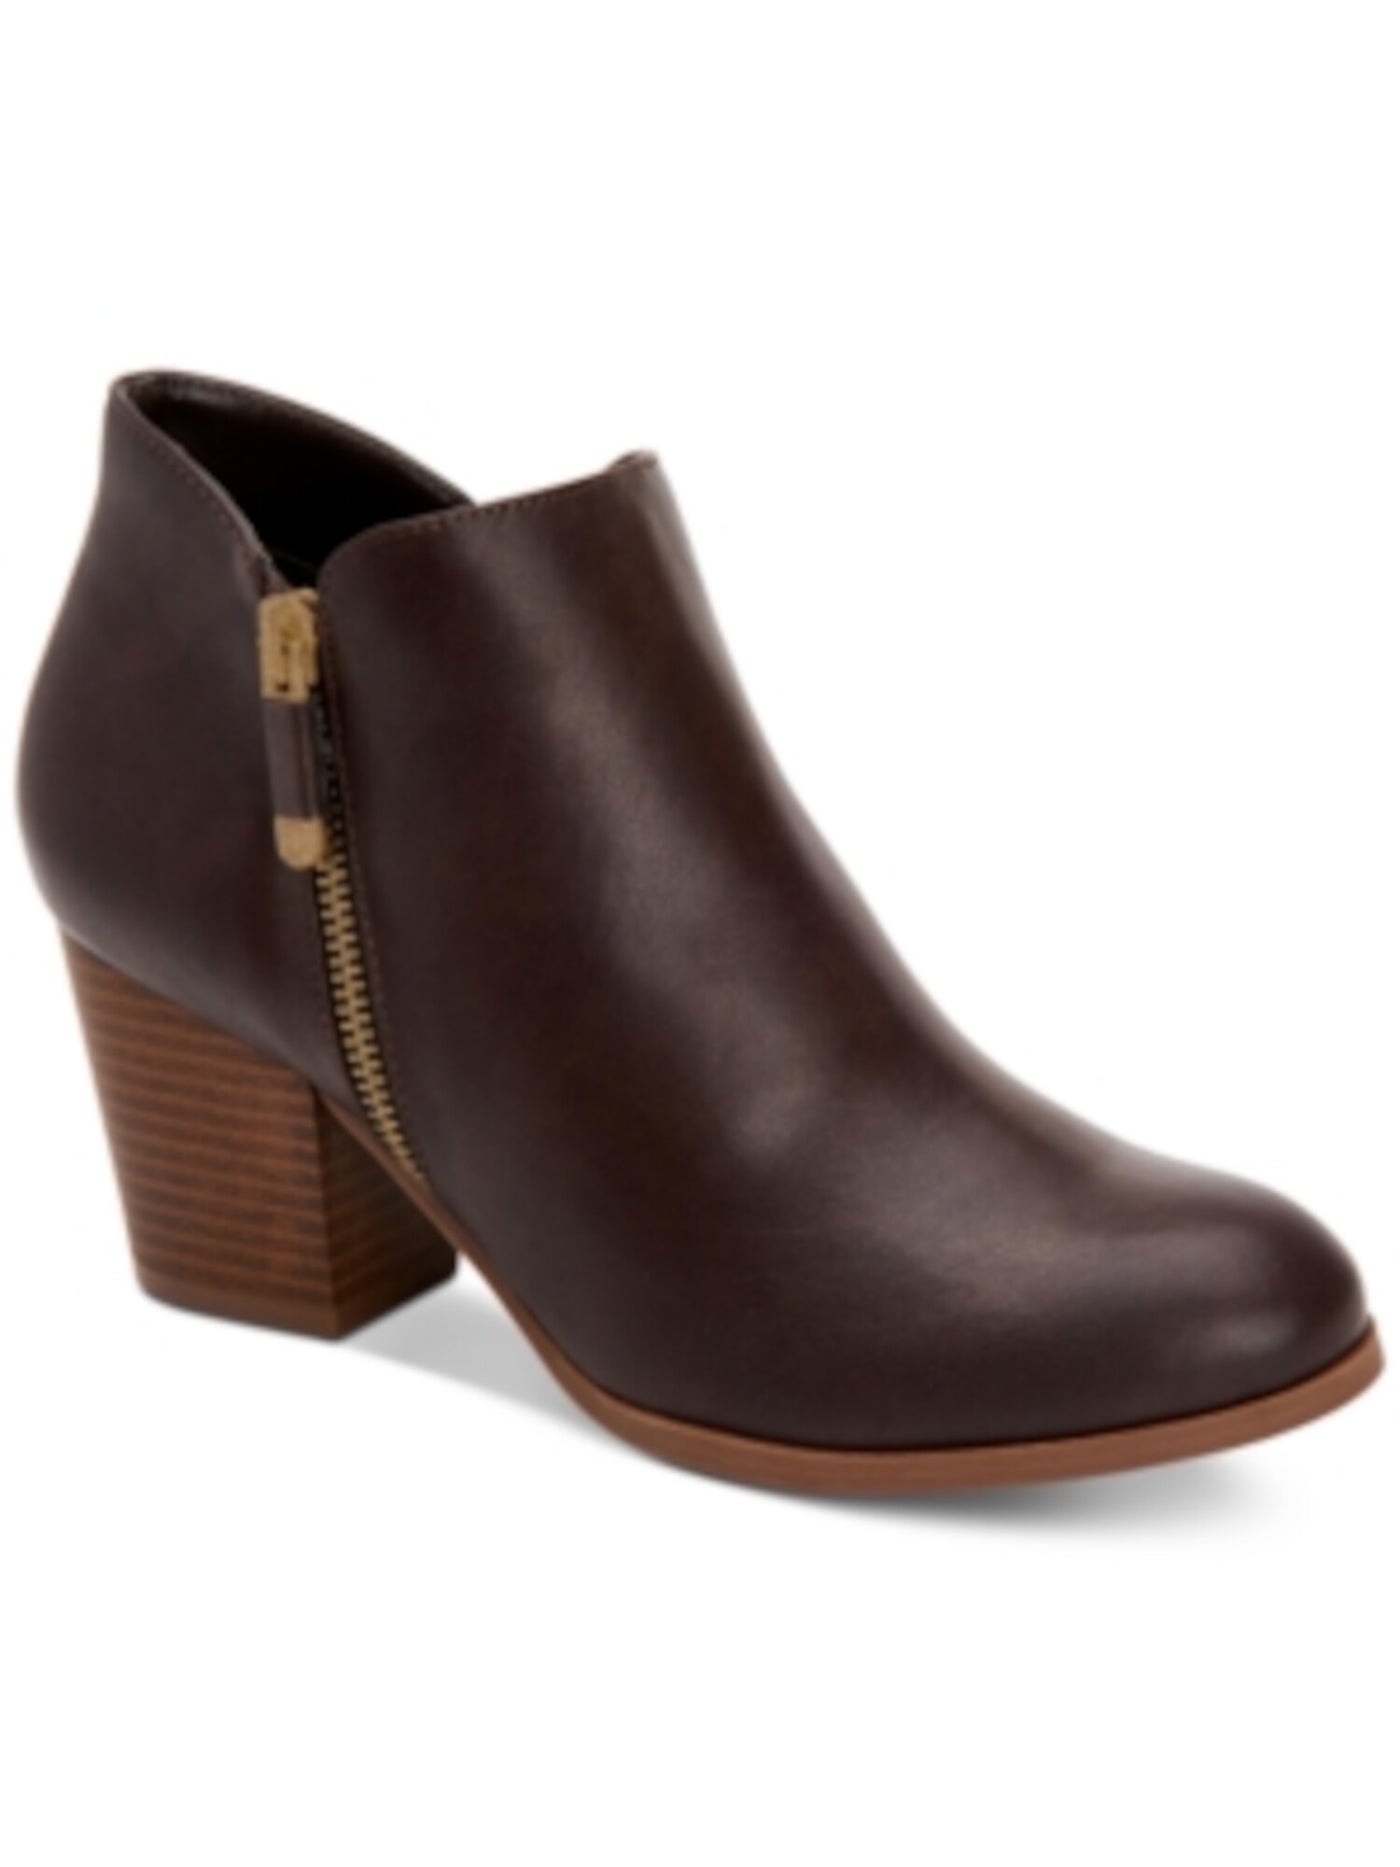 STYLE & COMPANY Womens Brown Notched At Sides Zipper Accent Masrinaa Almond Toe Block Heel Zip-Up Booties 10 M